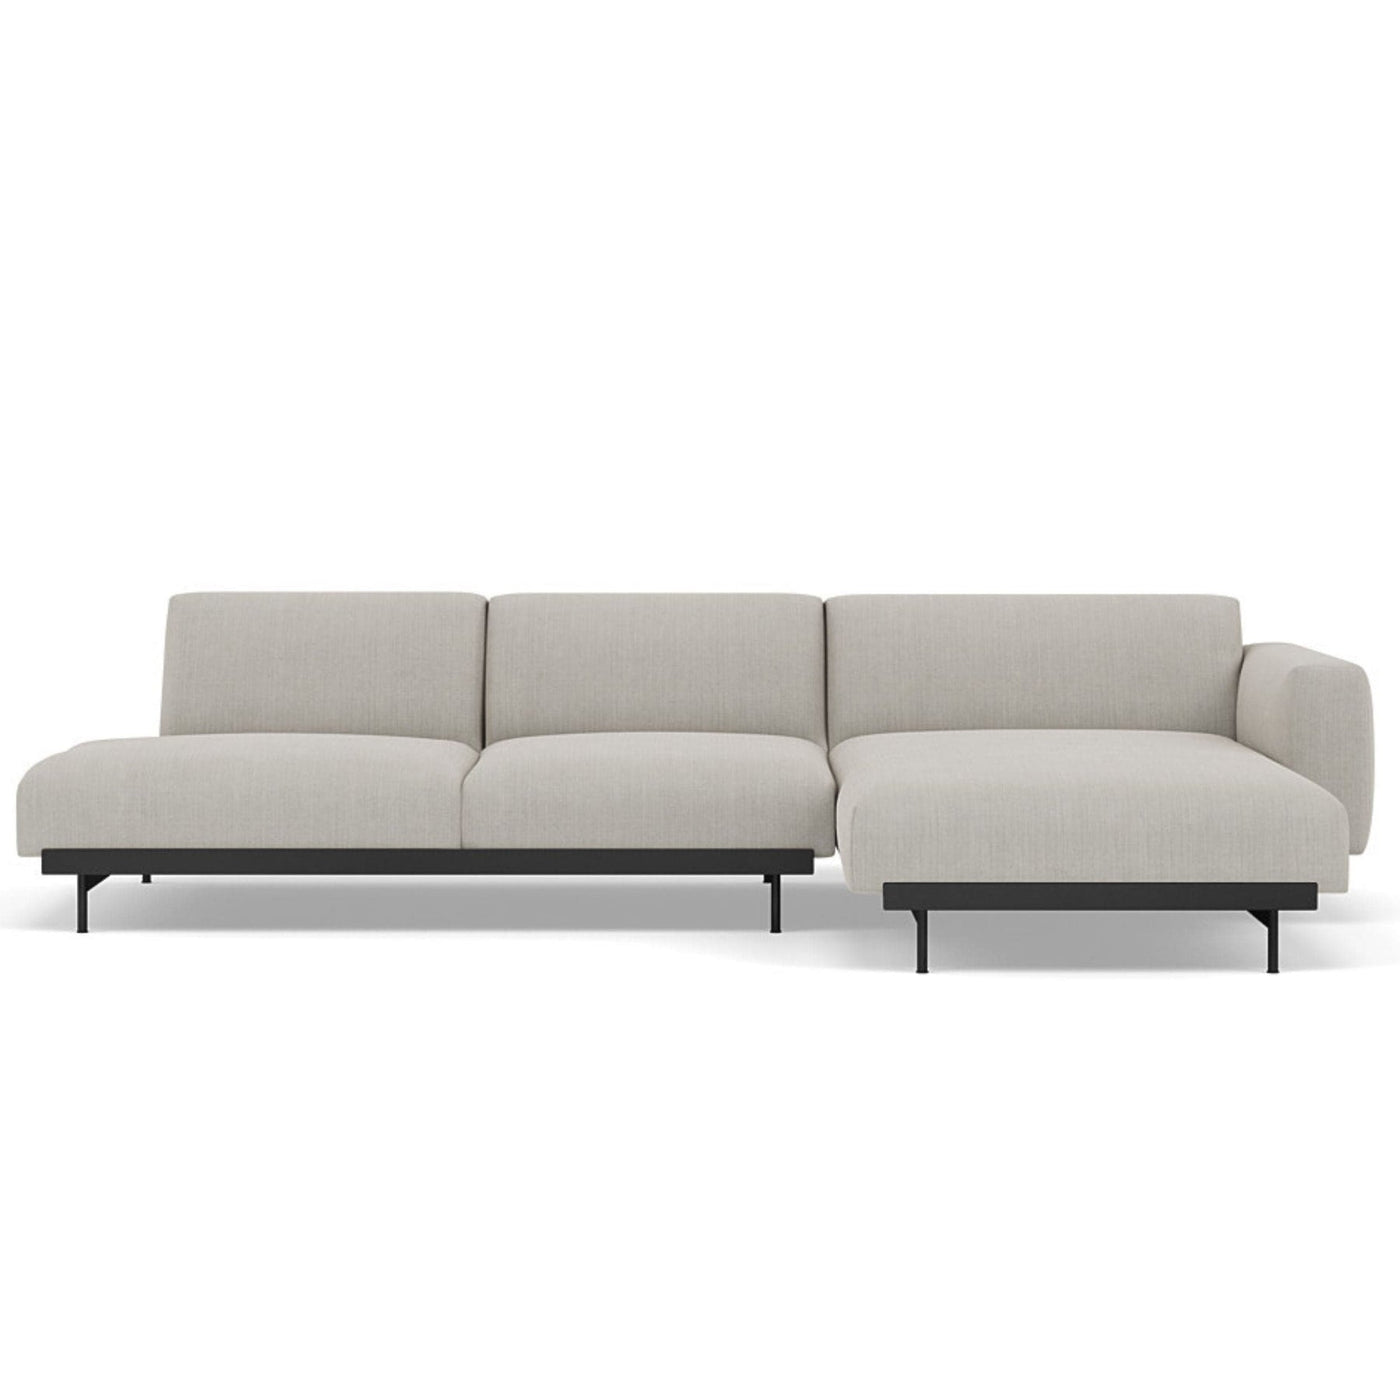 Muuto In Situ Modular 3 Seater Sofa, configuration 8. Made to order from someday designs. #colour_fiord-201